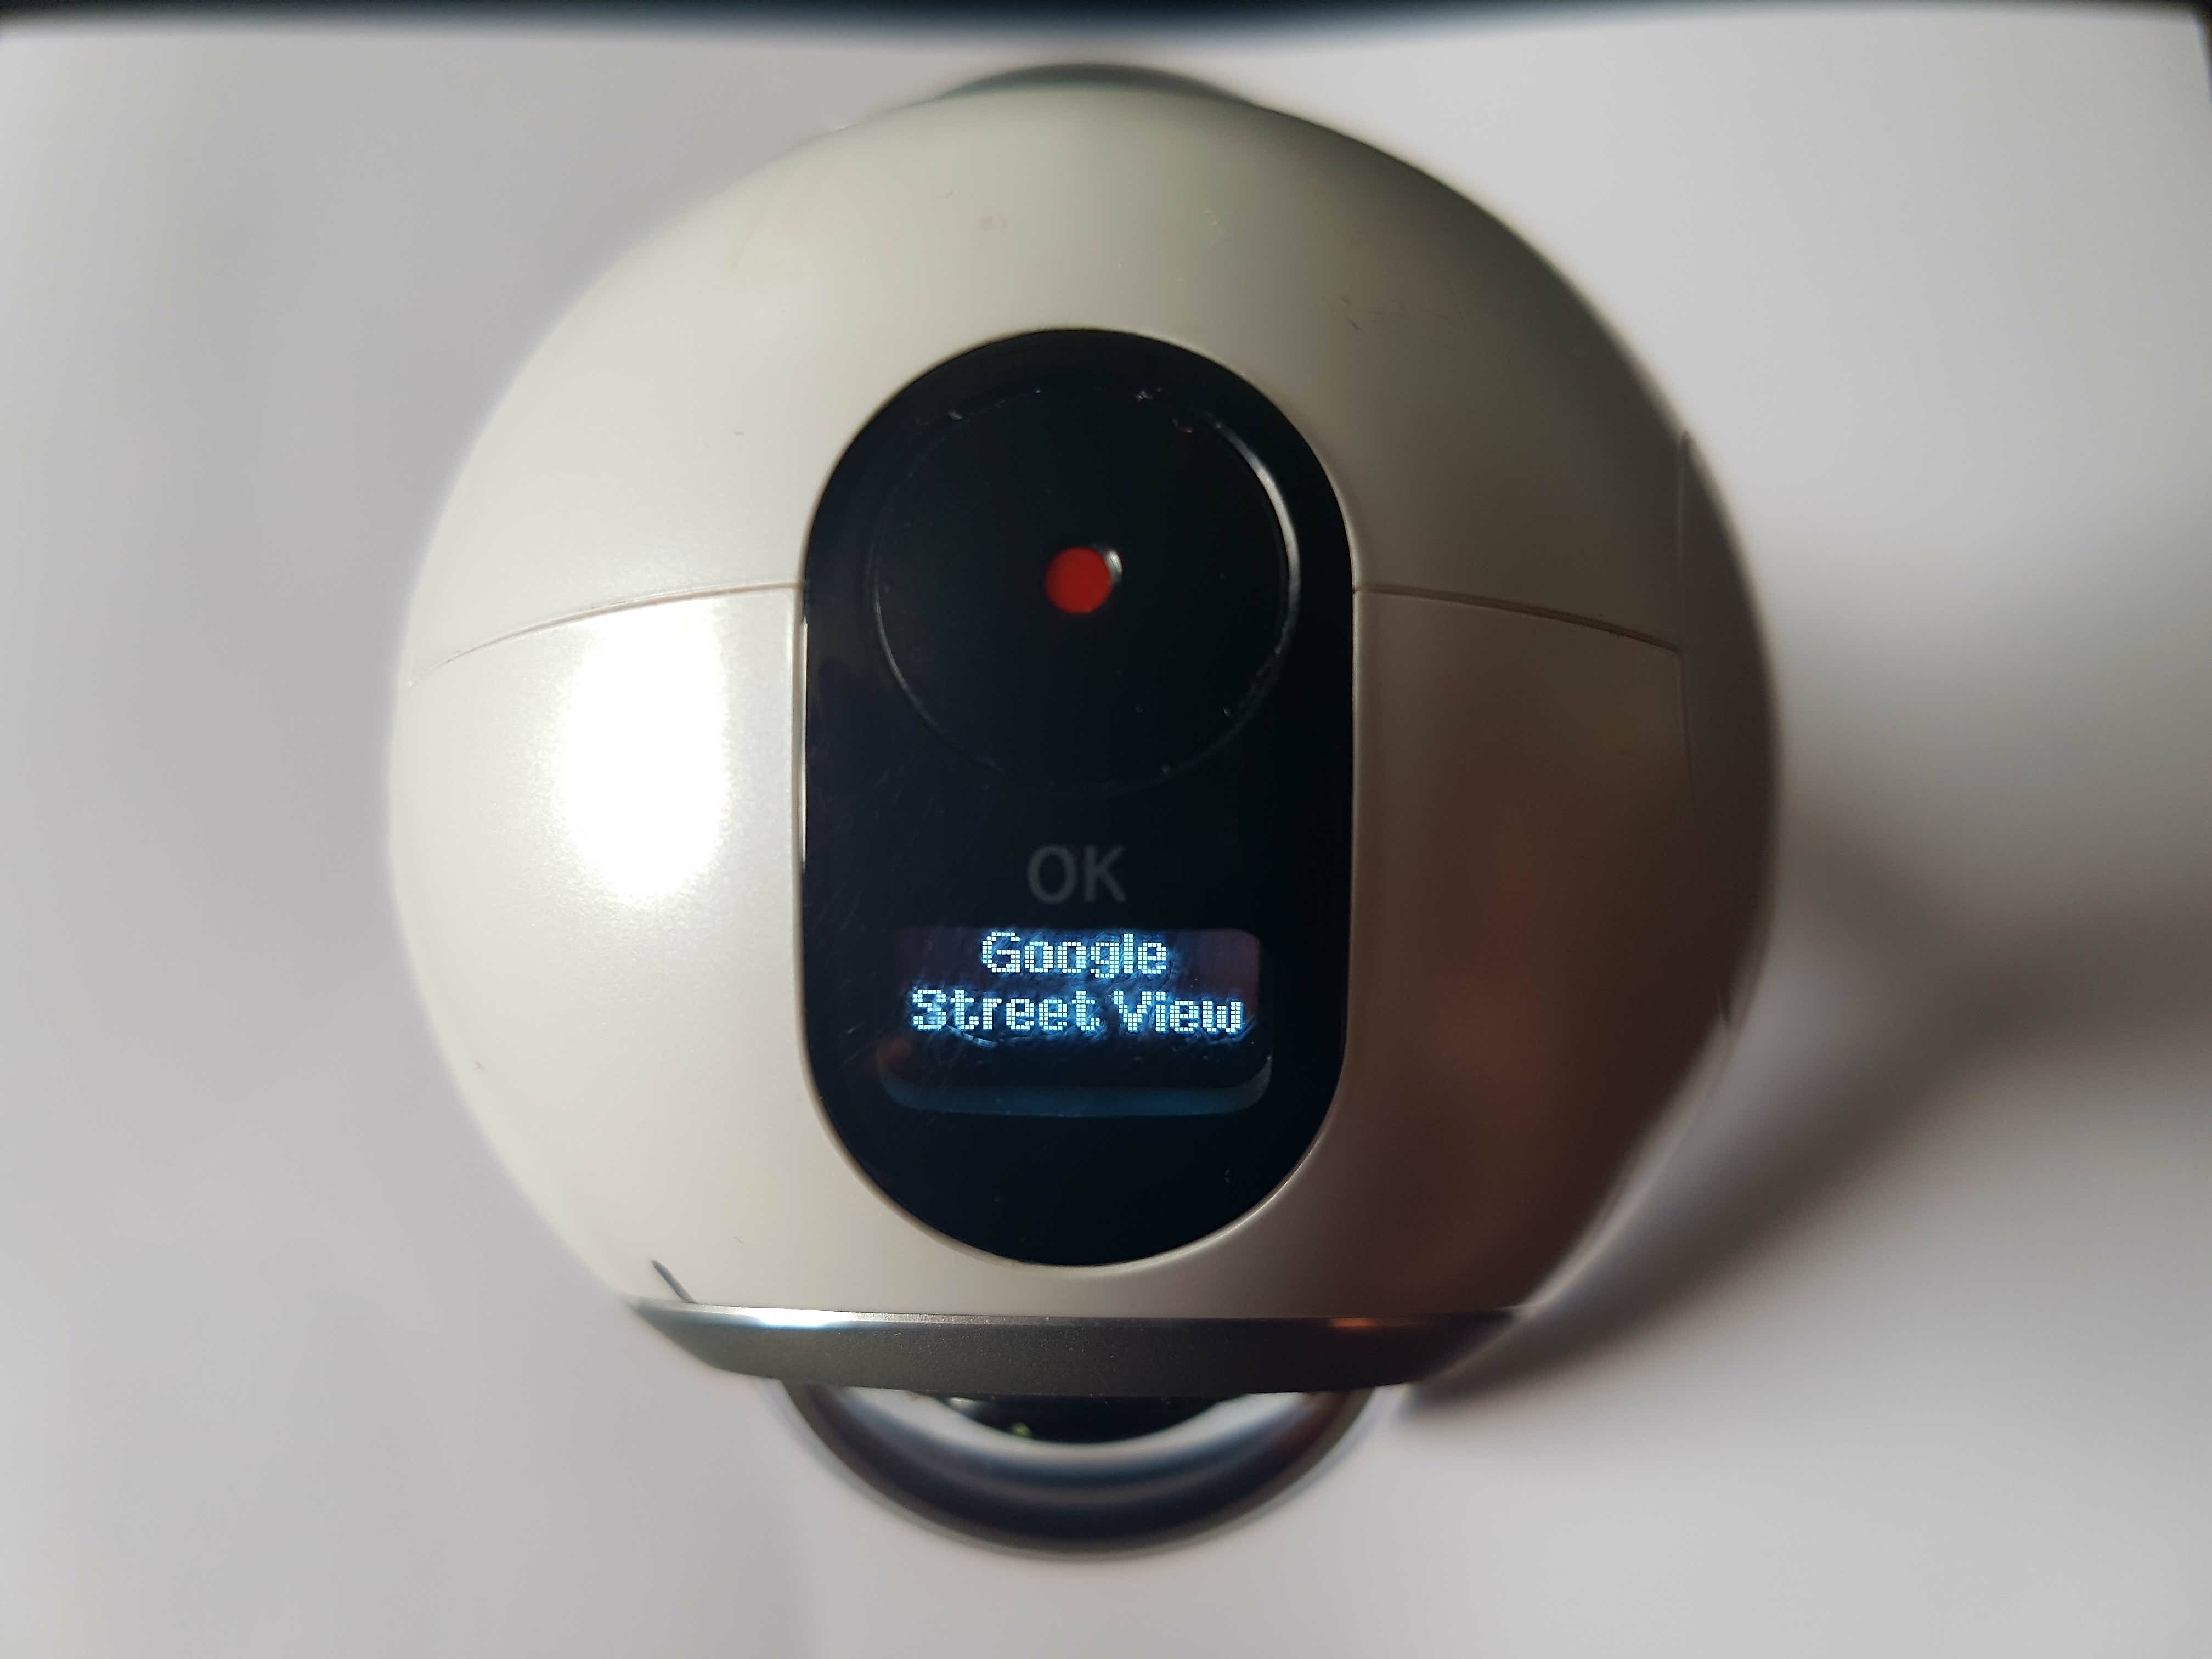 20170804 134045 - Connect the Gear 360 To Google Street View